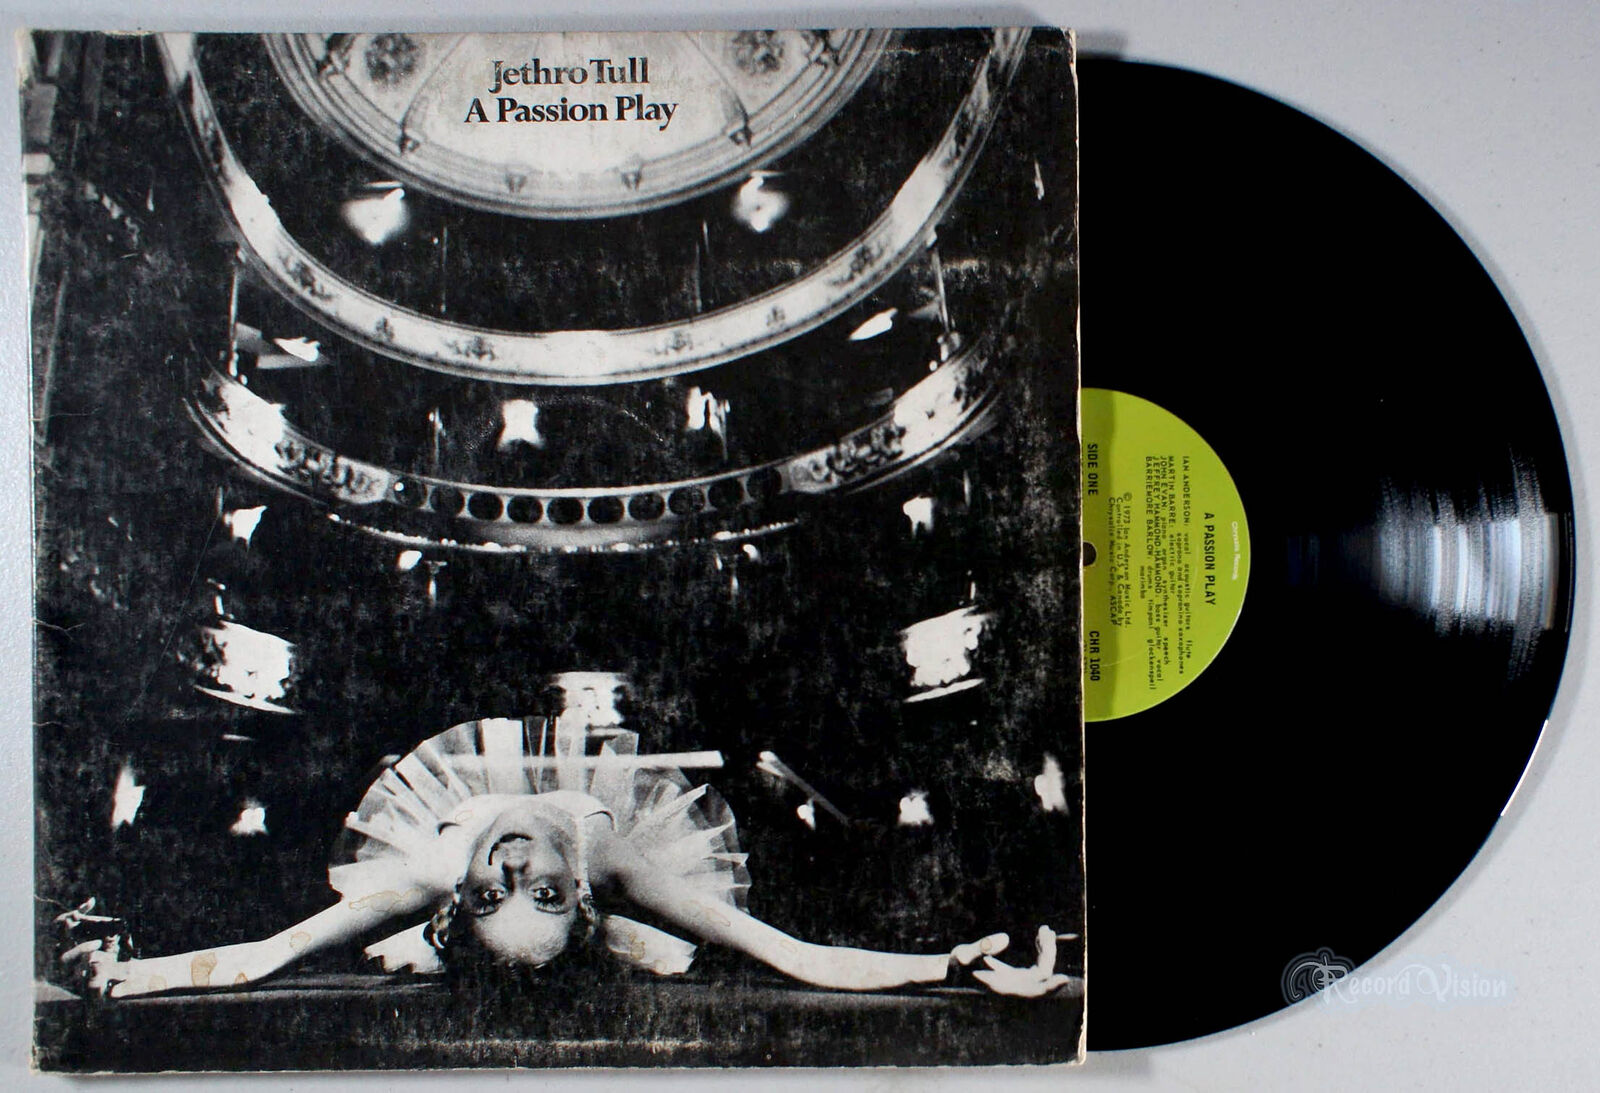 Jethro Tull - A Passion Play (1973) Vinyl LP • Gate + BOOK •